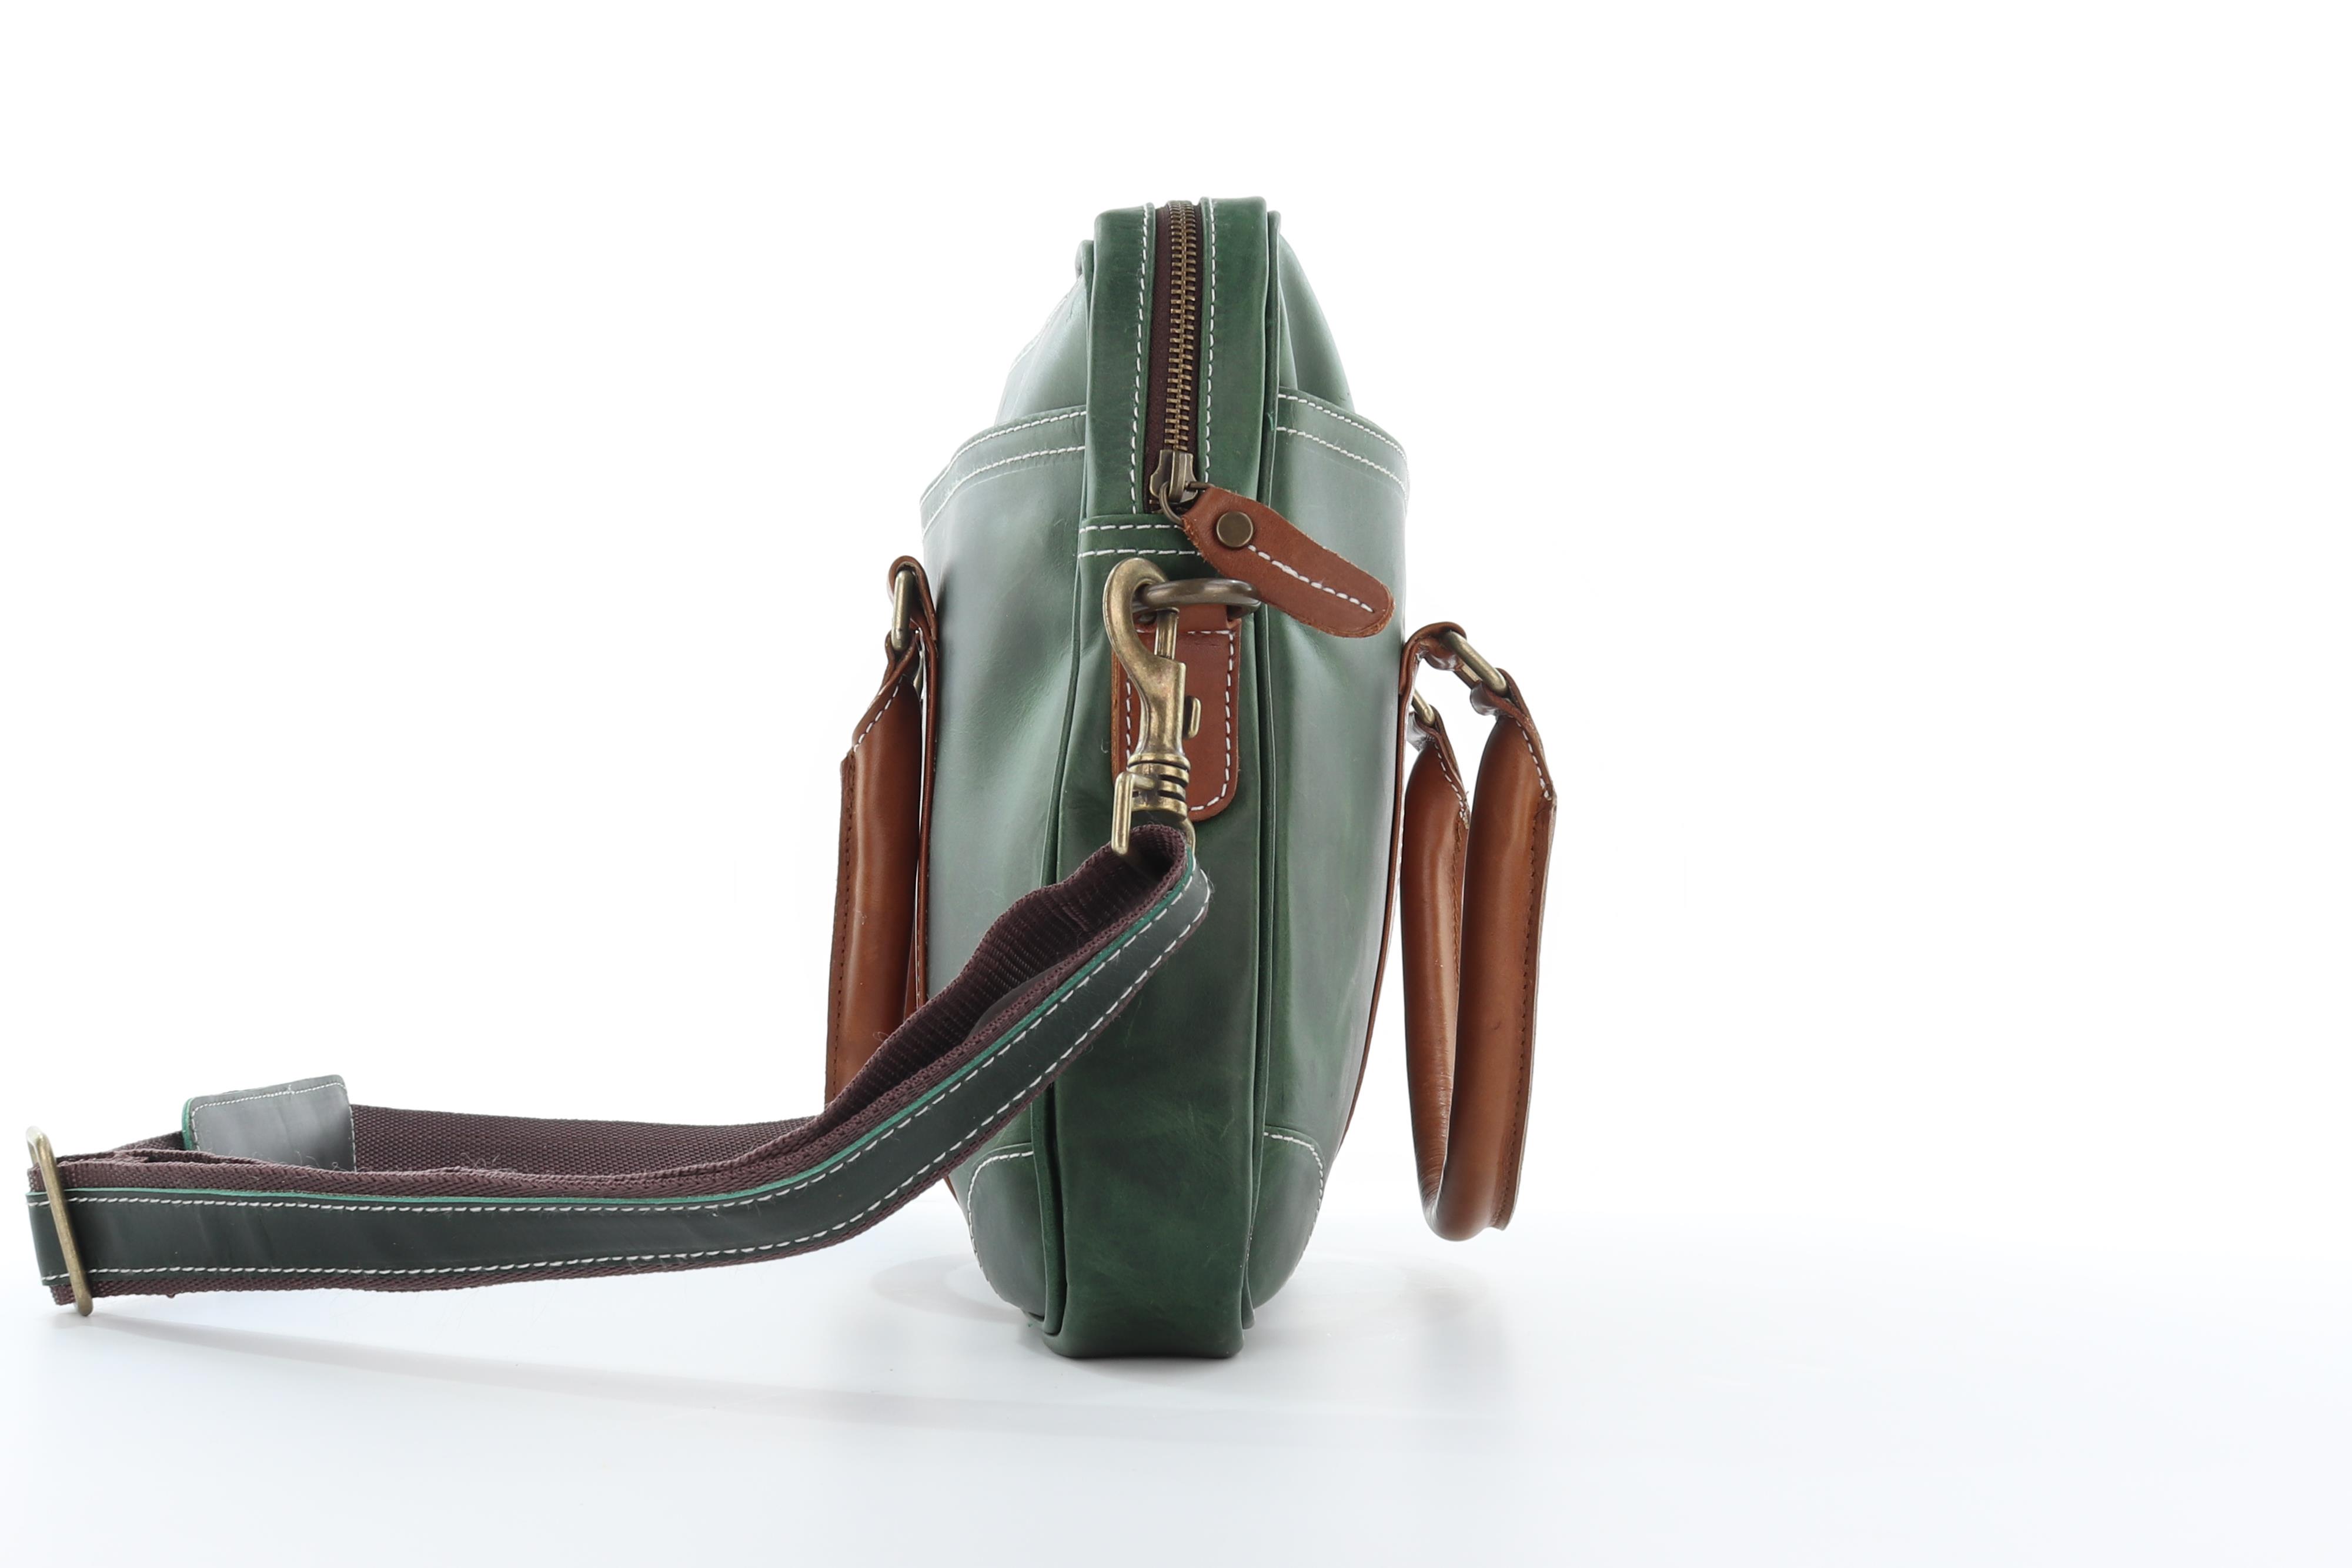 Haden Leather Bag - Laptop Bag - Green - side view2